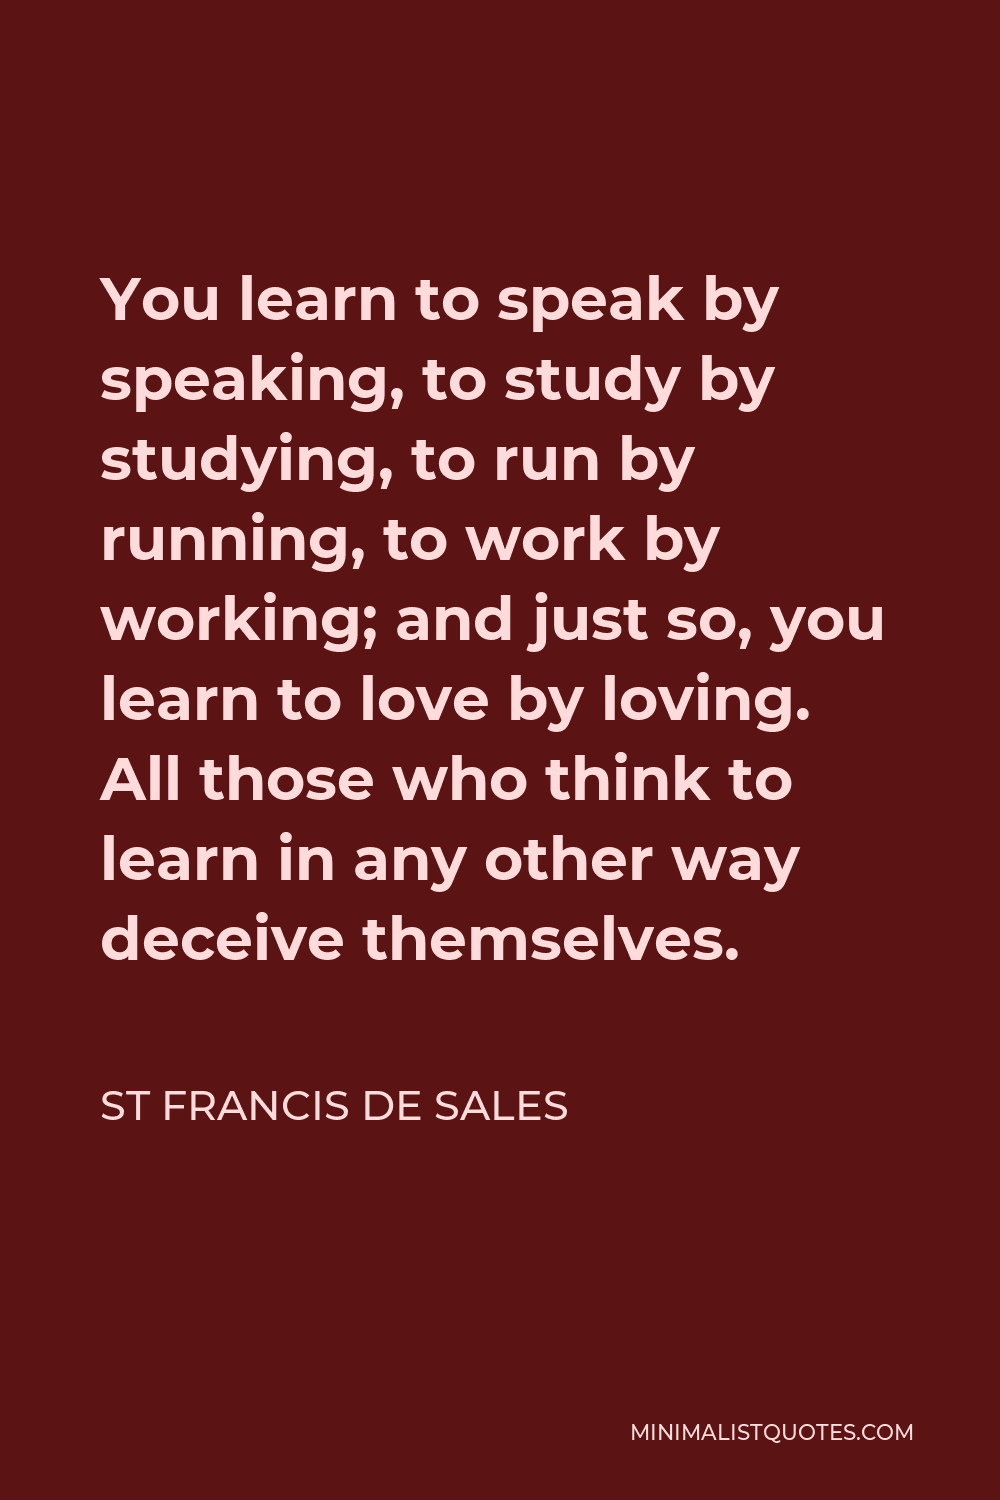 St Francis De Sales Quote - You learn to speak by speaking, to study by studying, to run by running, to work by working; and just so, you learn to love by loving. All those who think to learn in any other way deceive themselves.